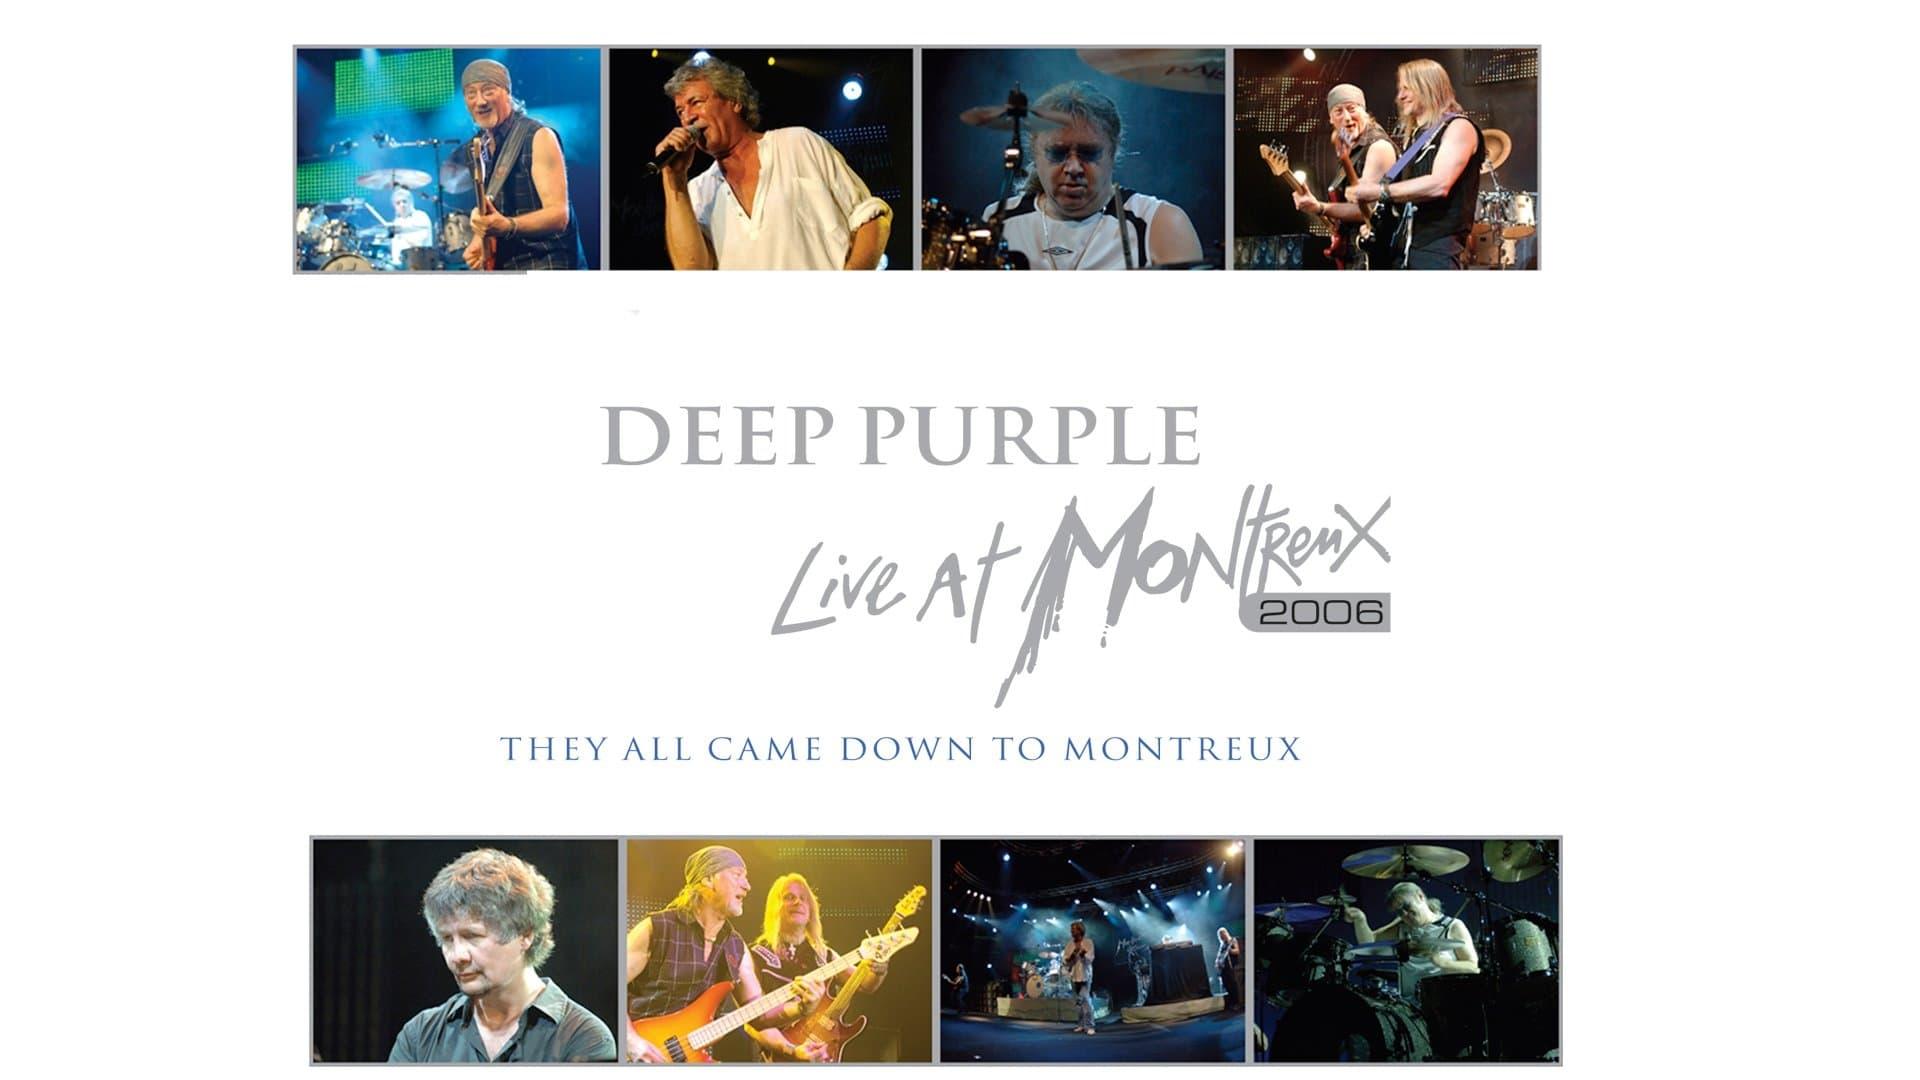 Deep Purple - They All Came Down To Montreux backdrop